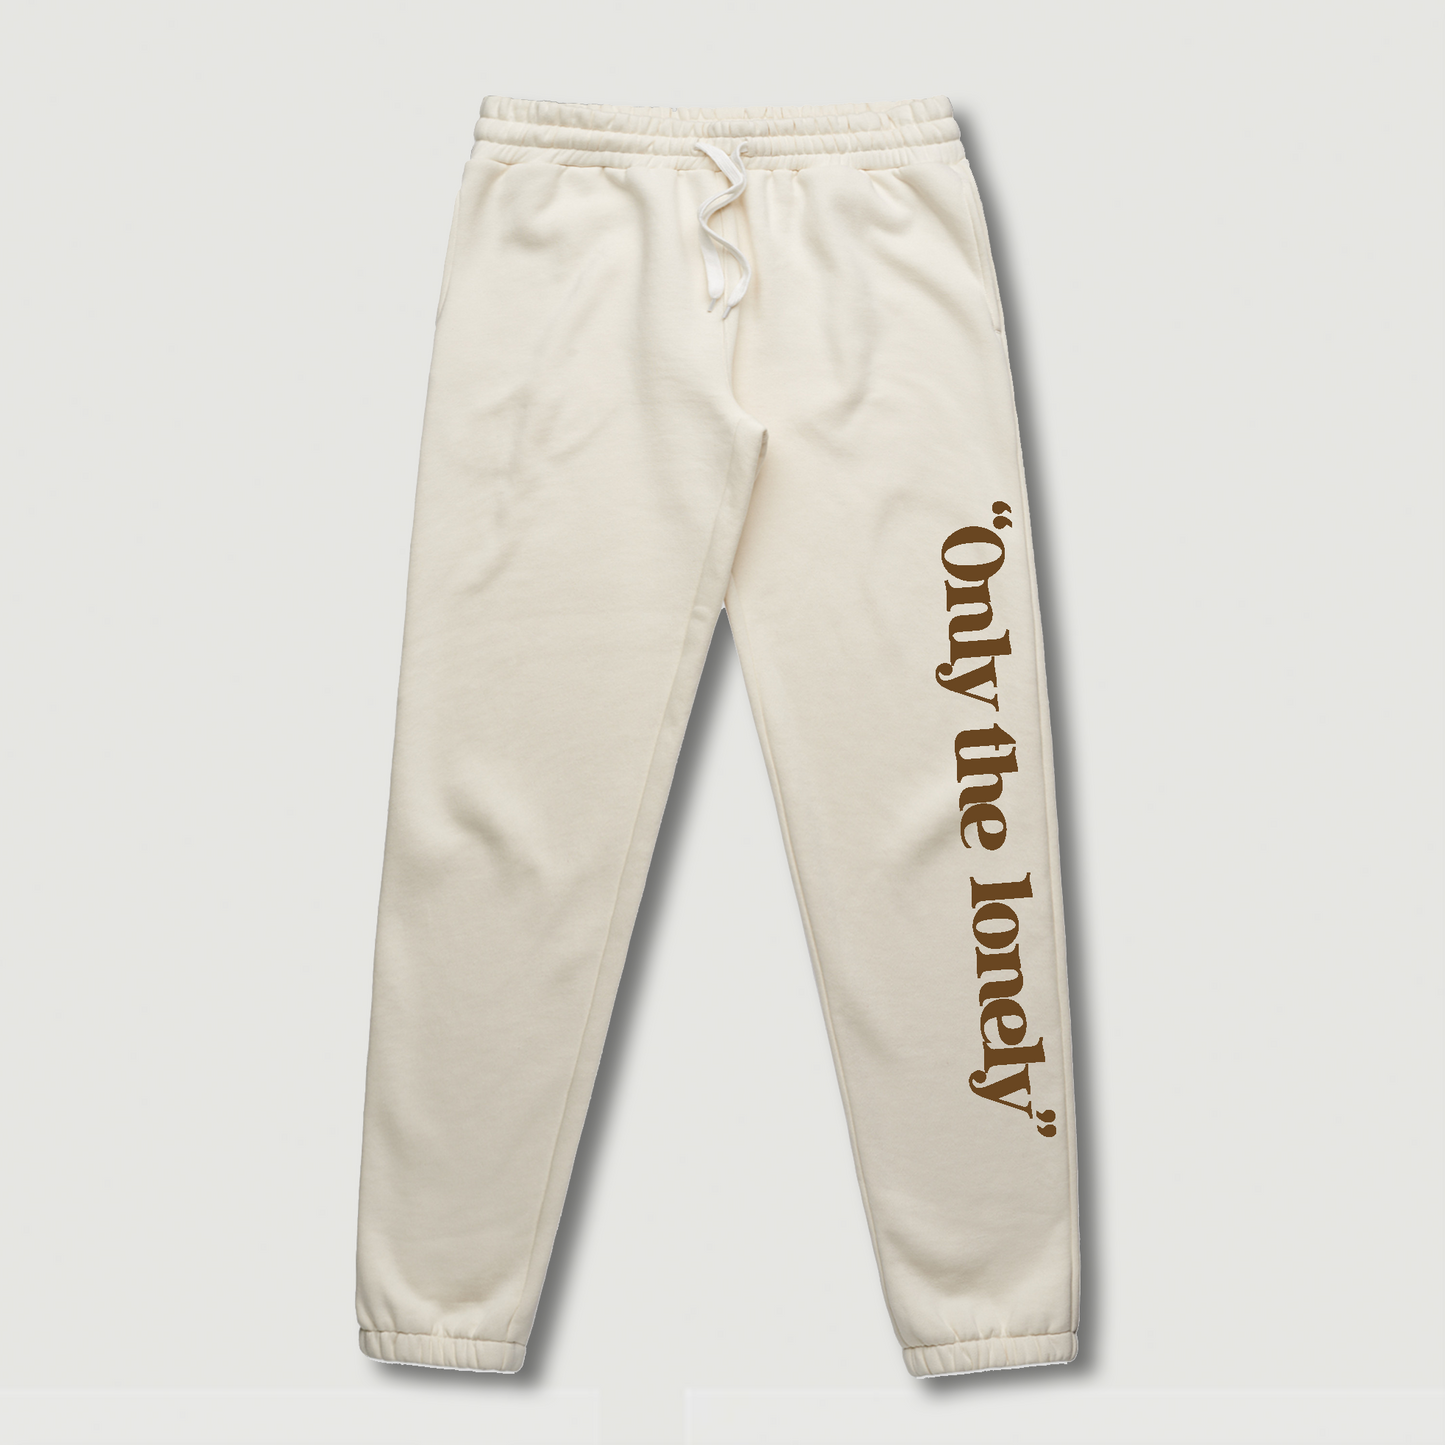 ONLY THE LONELY LOGO SWEATPANTS (ECRU/BROWN)